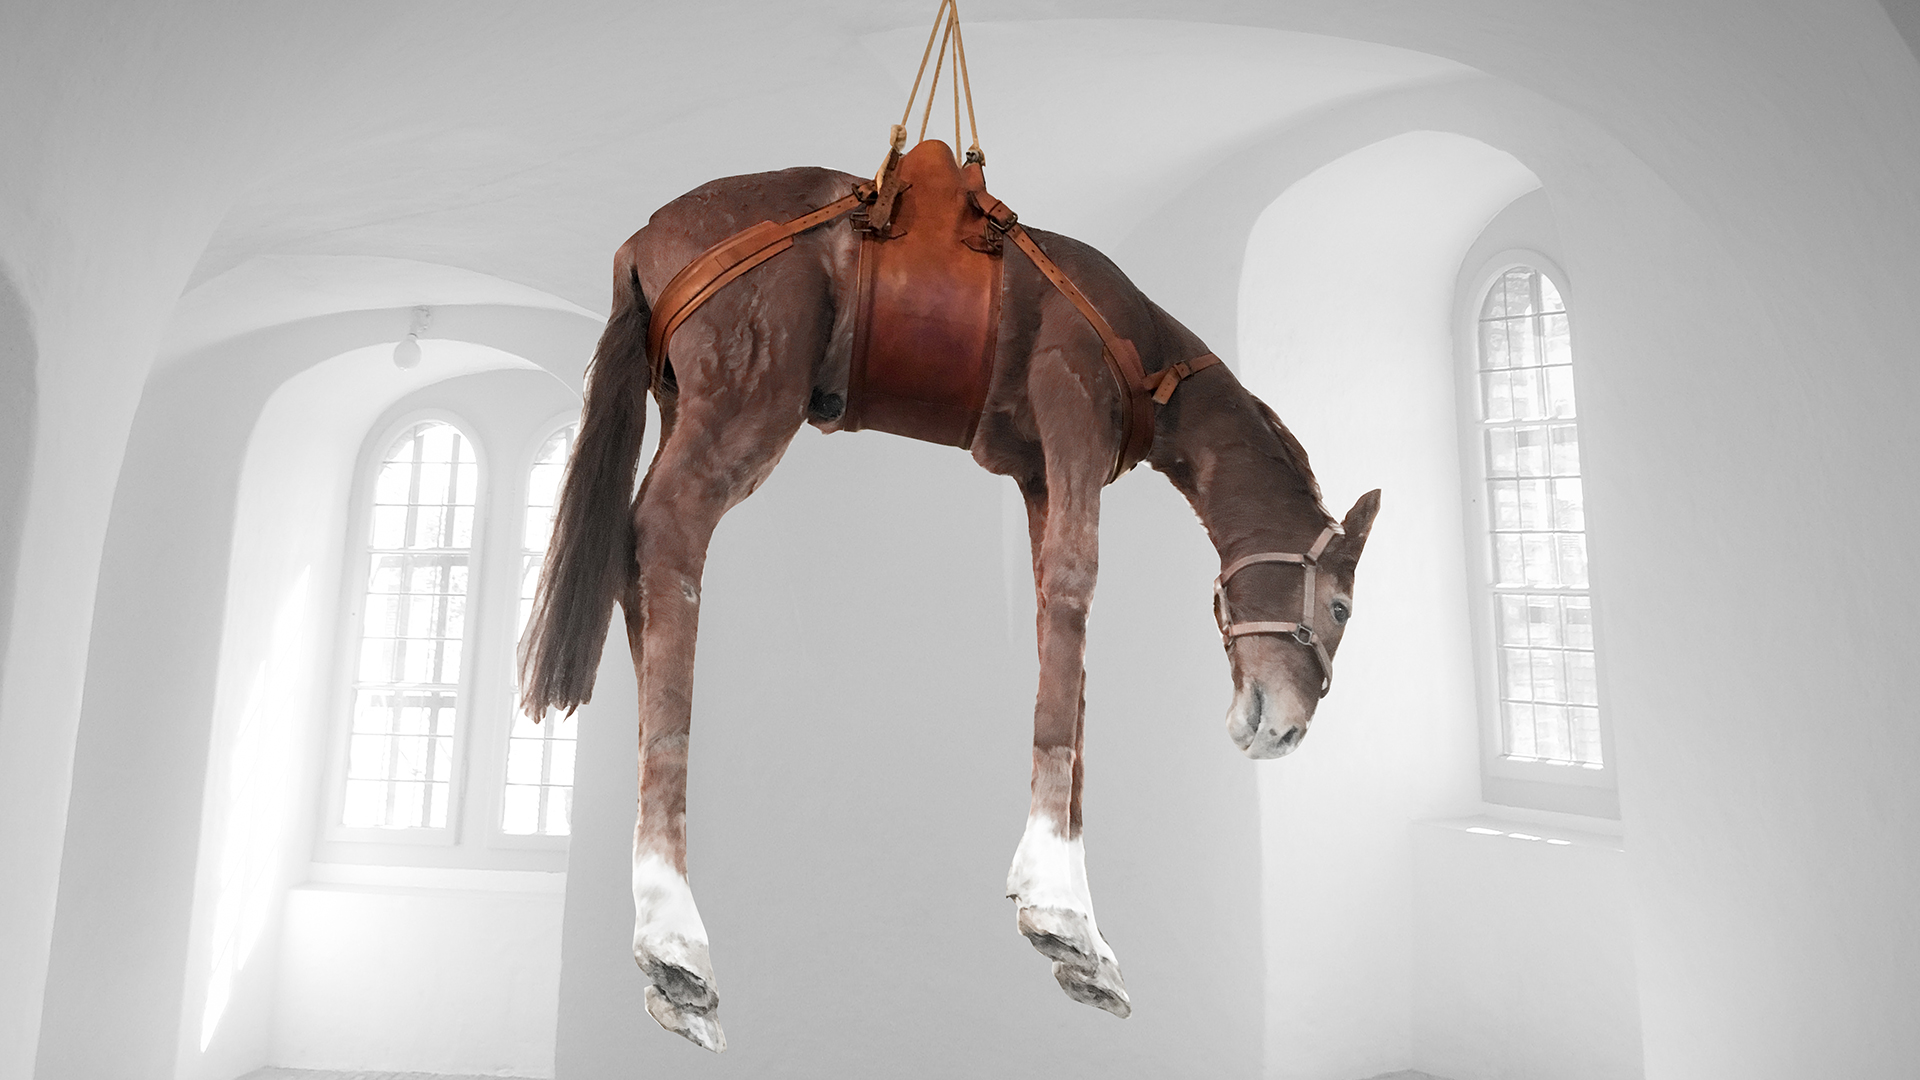 Stuffed and hanged horse in the museum of contemporary art